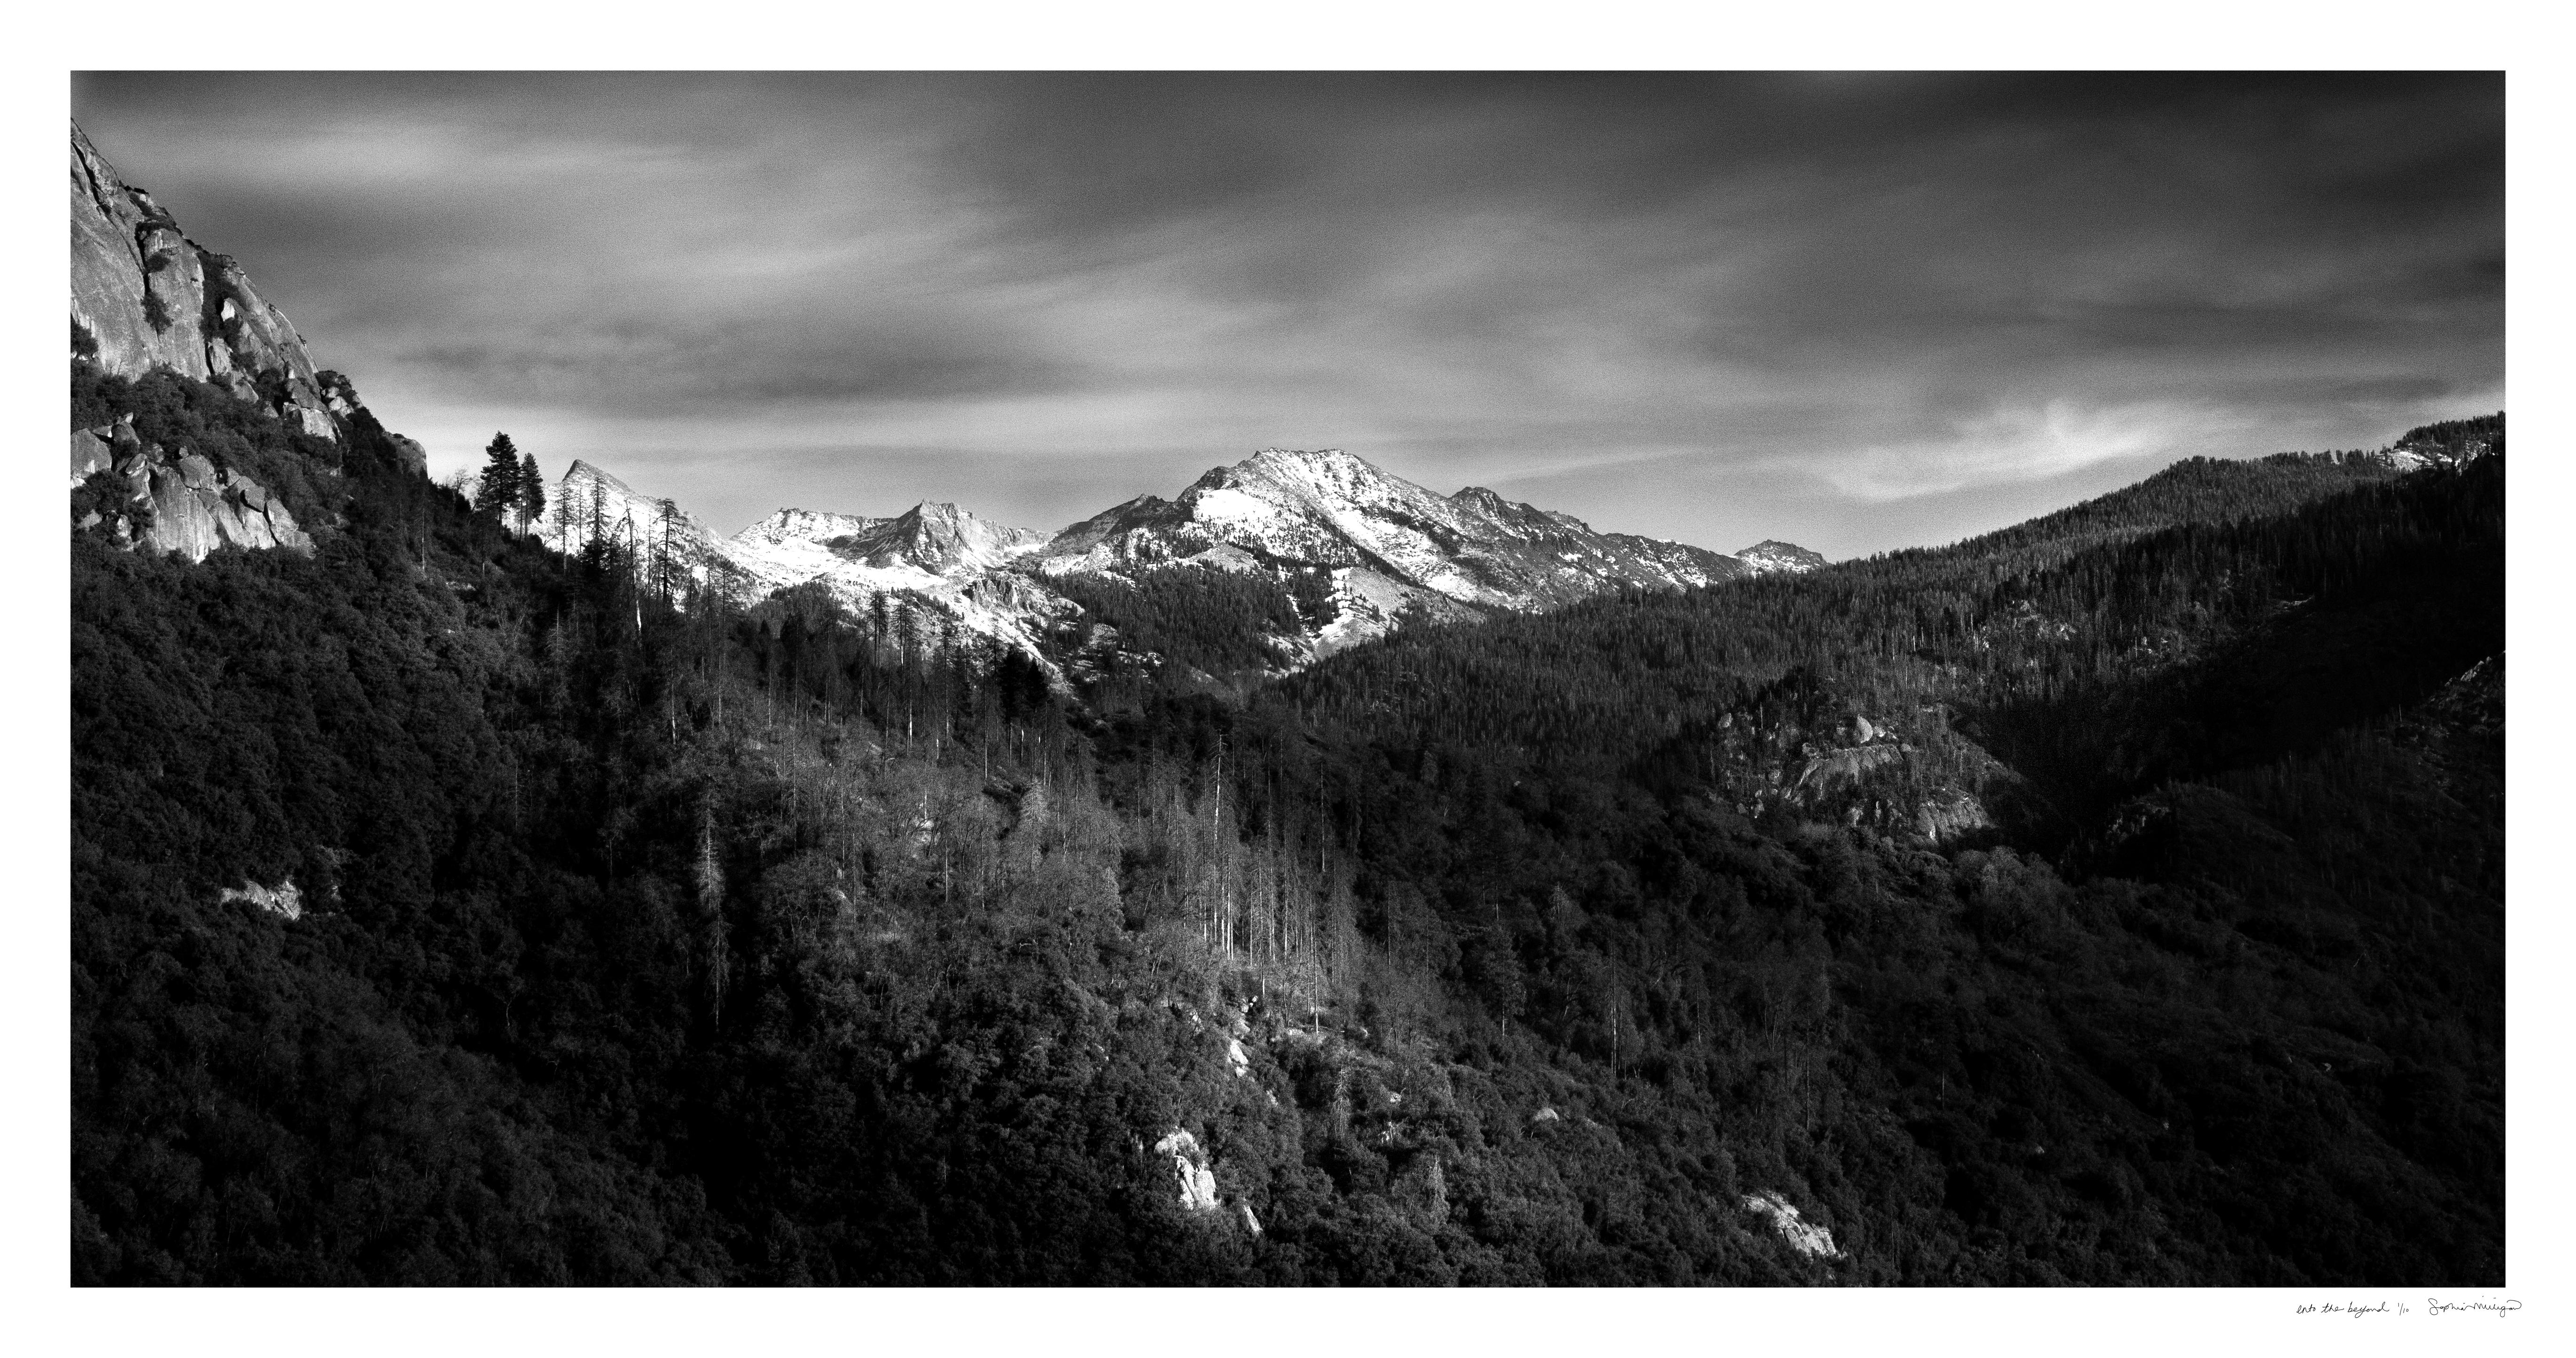 Black and White Photograph Sophia Milligan - « Into The Beyond » Nature sauvage montagne panorama ciel neige forêt paysage blanc